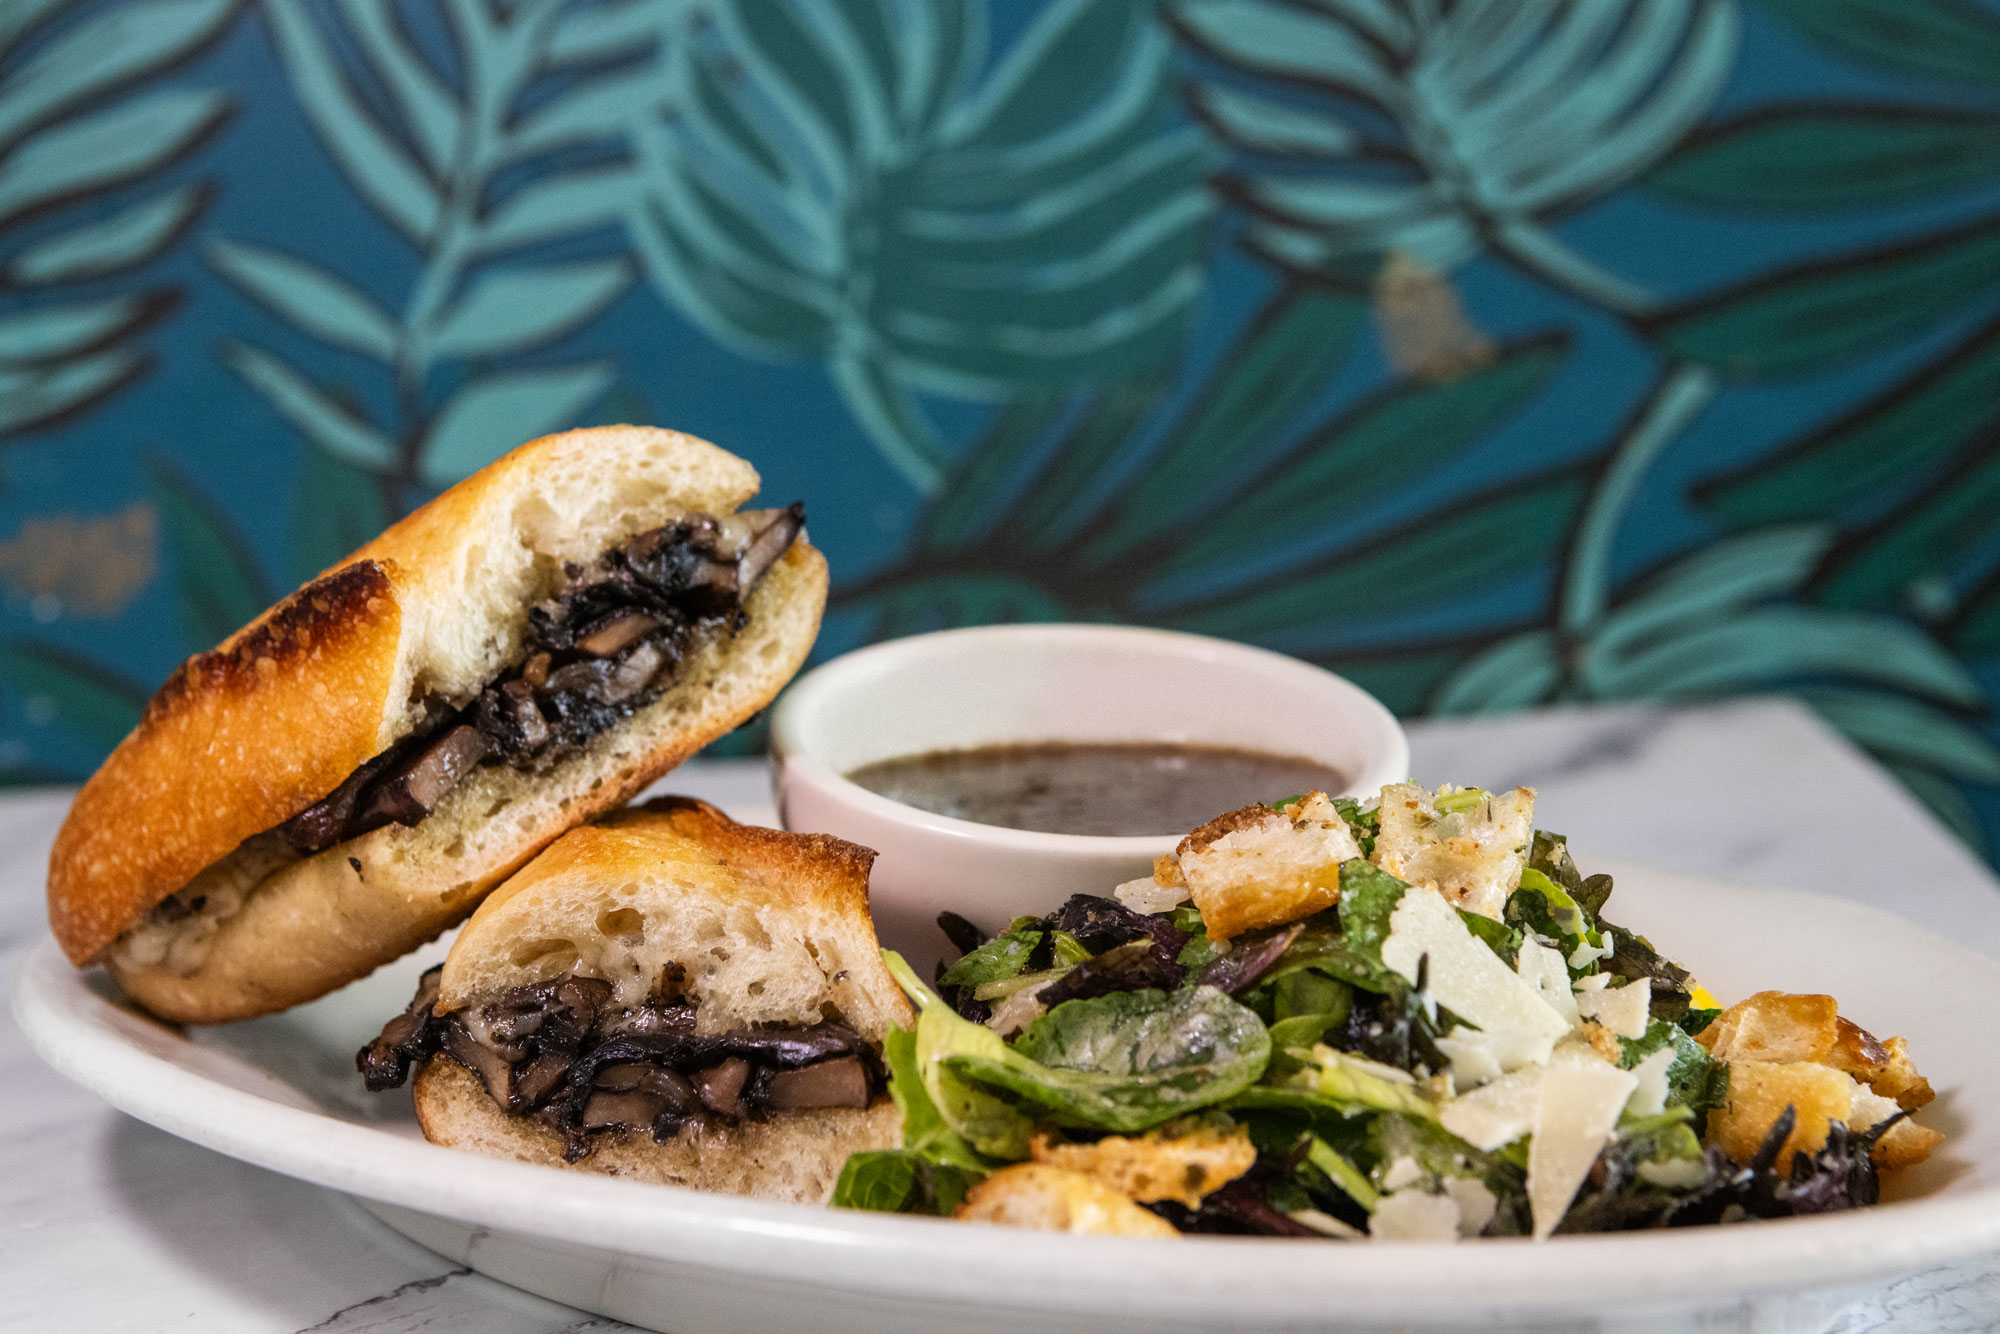 SEA Floret by Cafe Flora french dip and salad